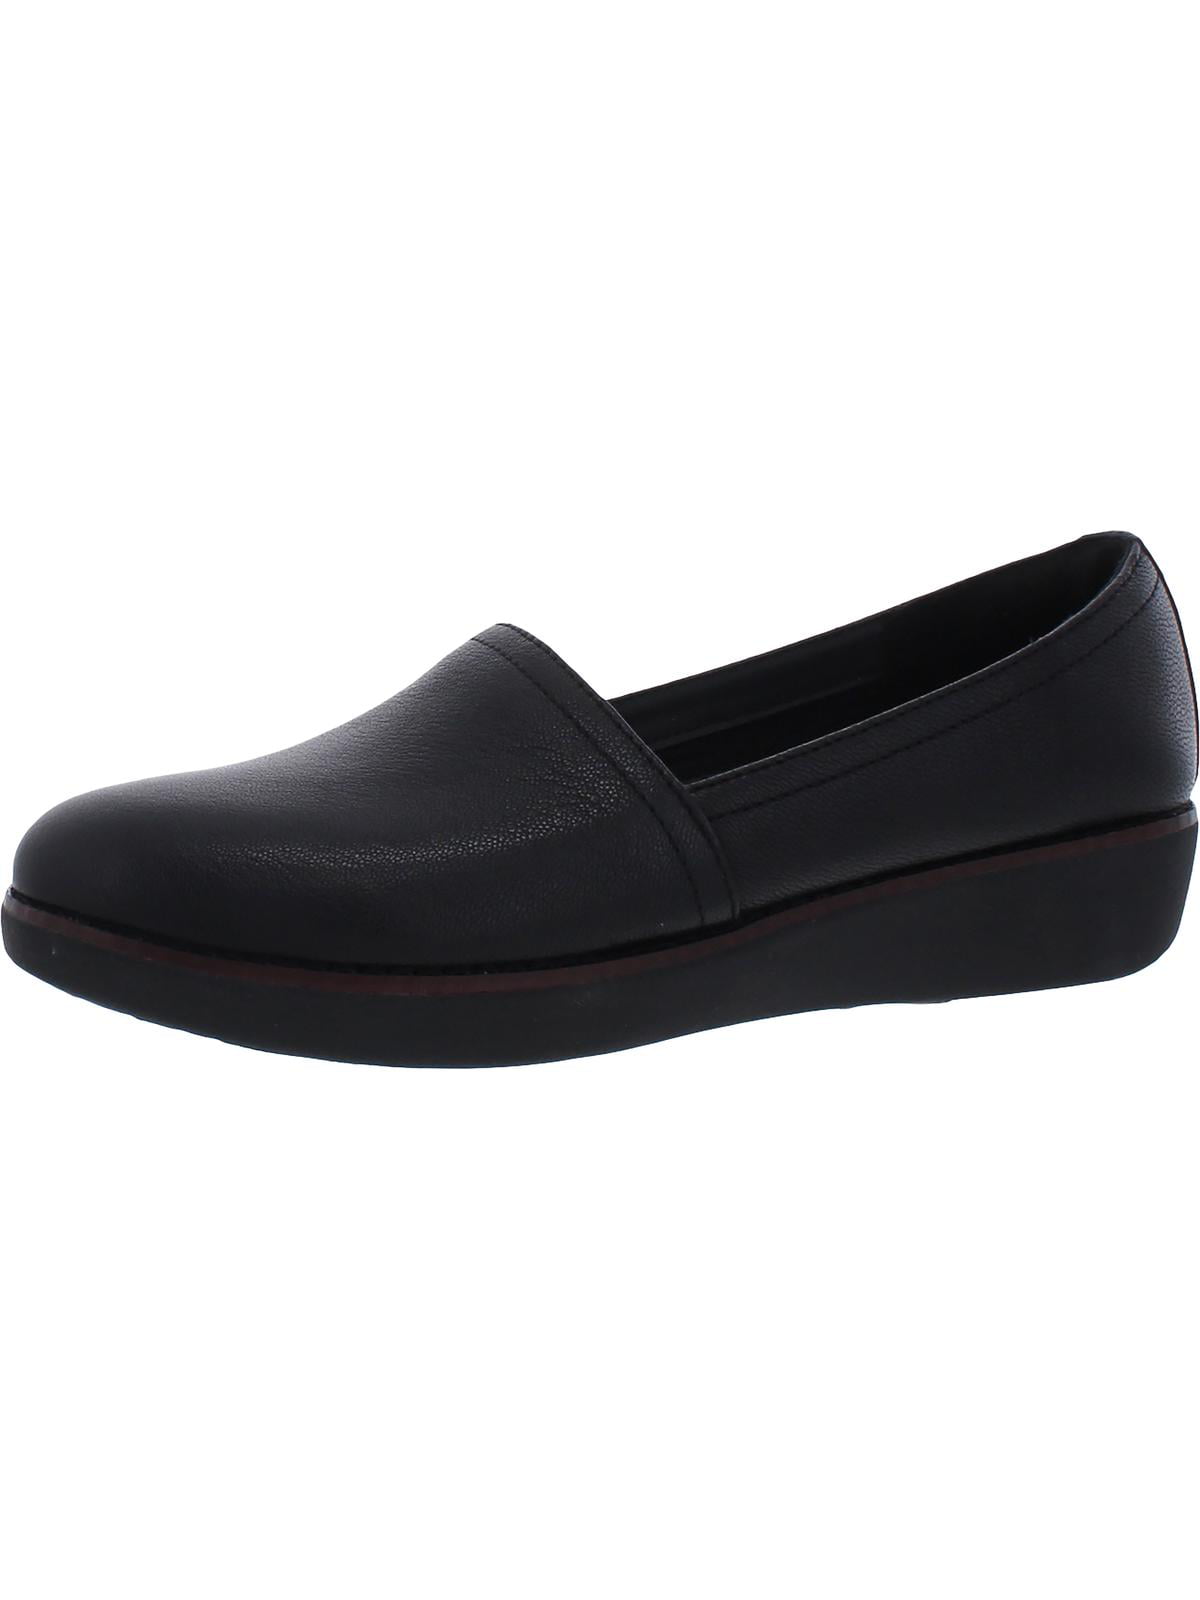 Fitflop Womens CASA Loafers Black Flat Shoes